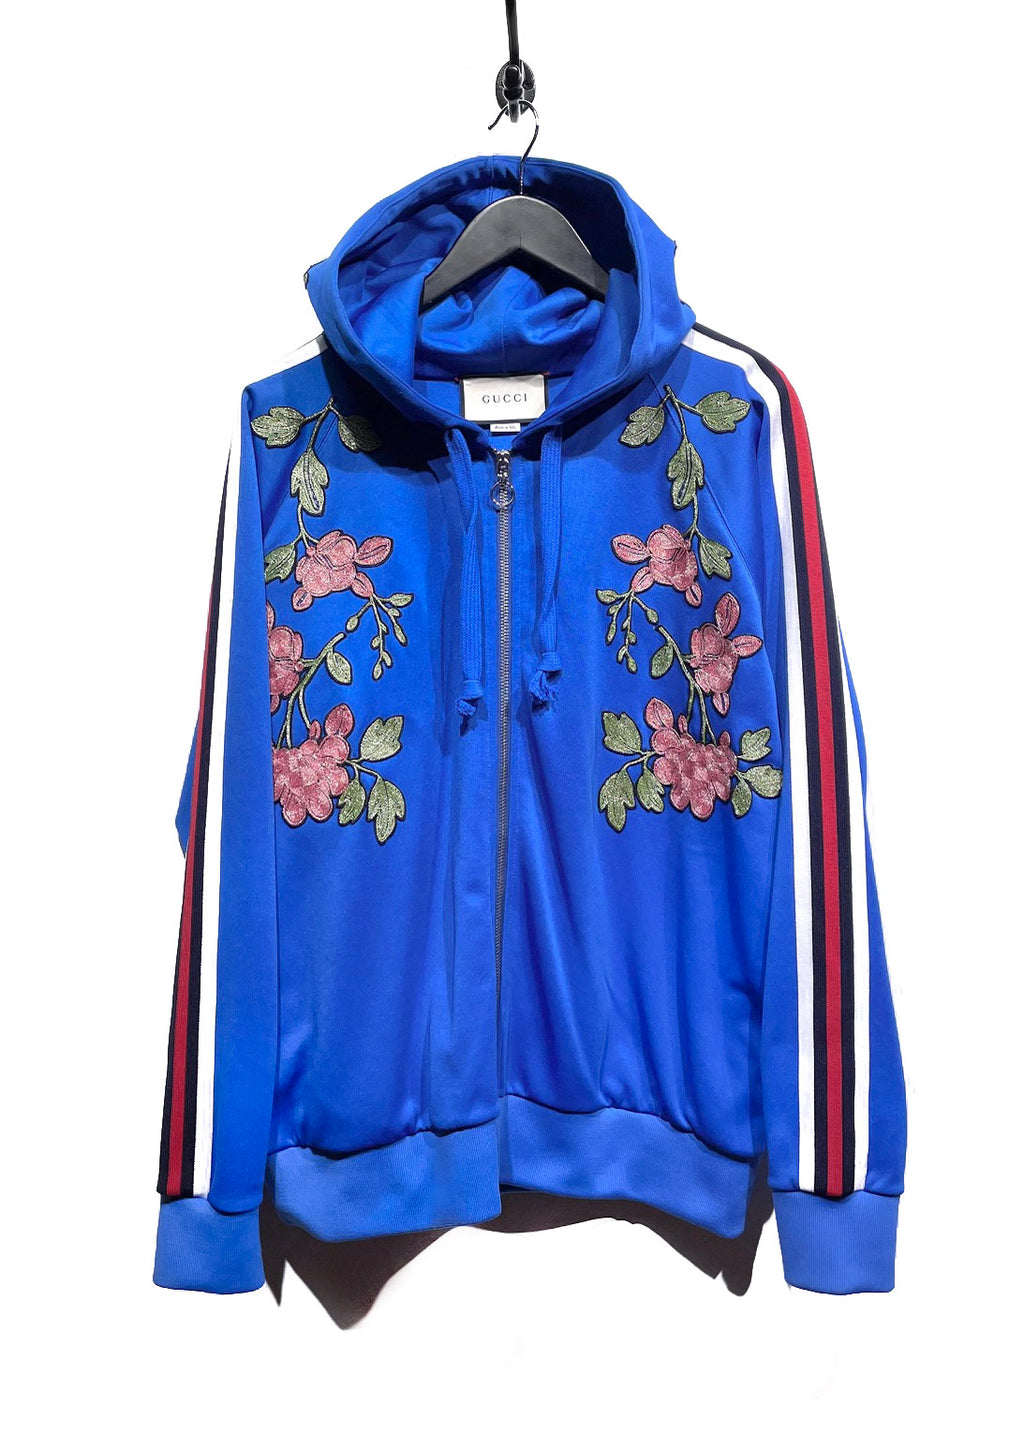 Gucci 2017 Blue Floral Embroidered Zip-up Hoodie